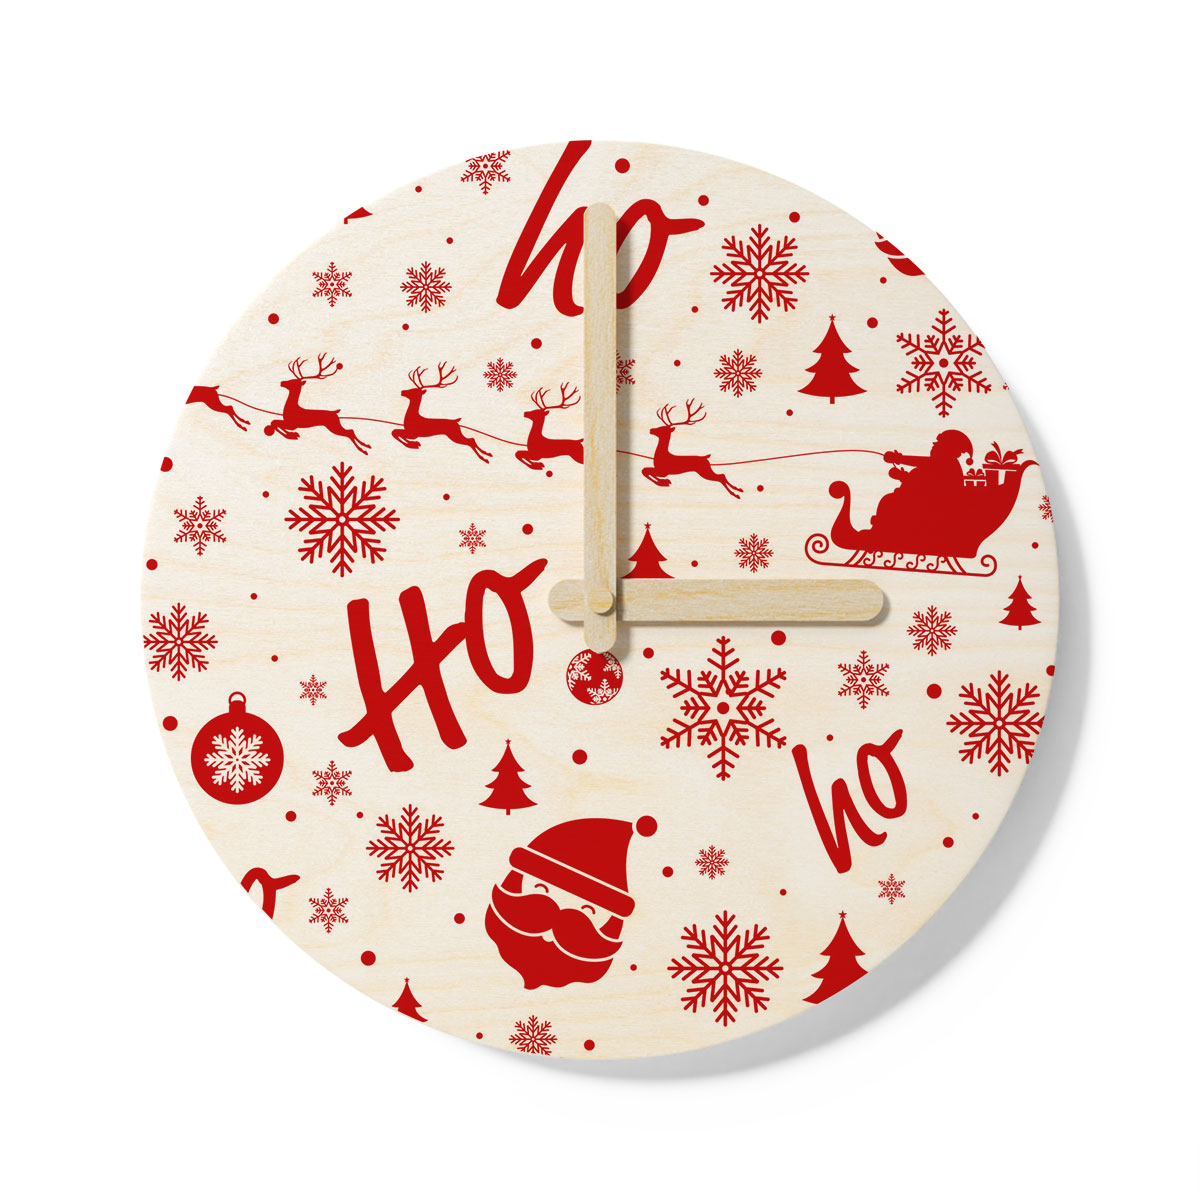 Santa Claus, Santas Reindeer And Christmas Sleigh On The Snowflake Background Wooden Wall Clock